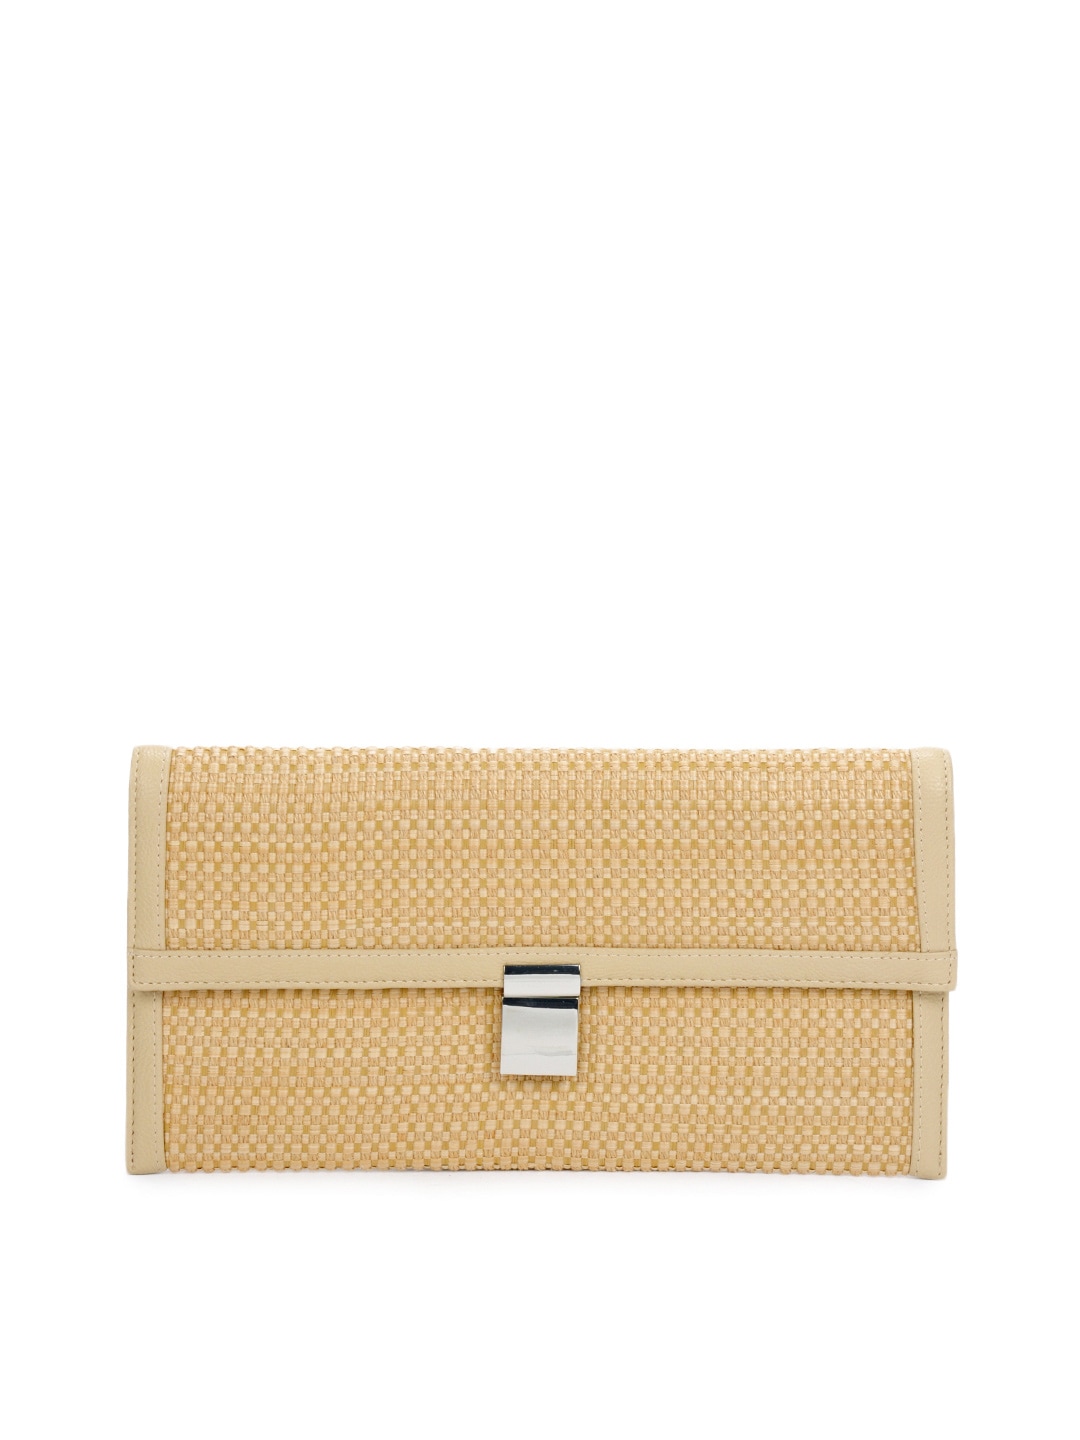 French Connection Women Beige Clutch